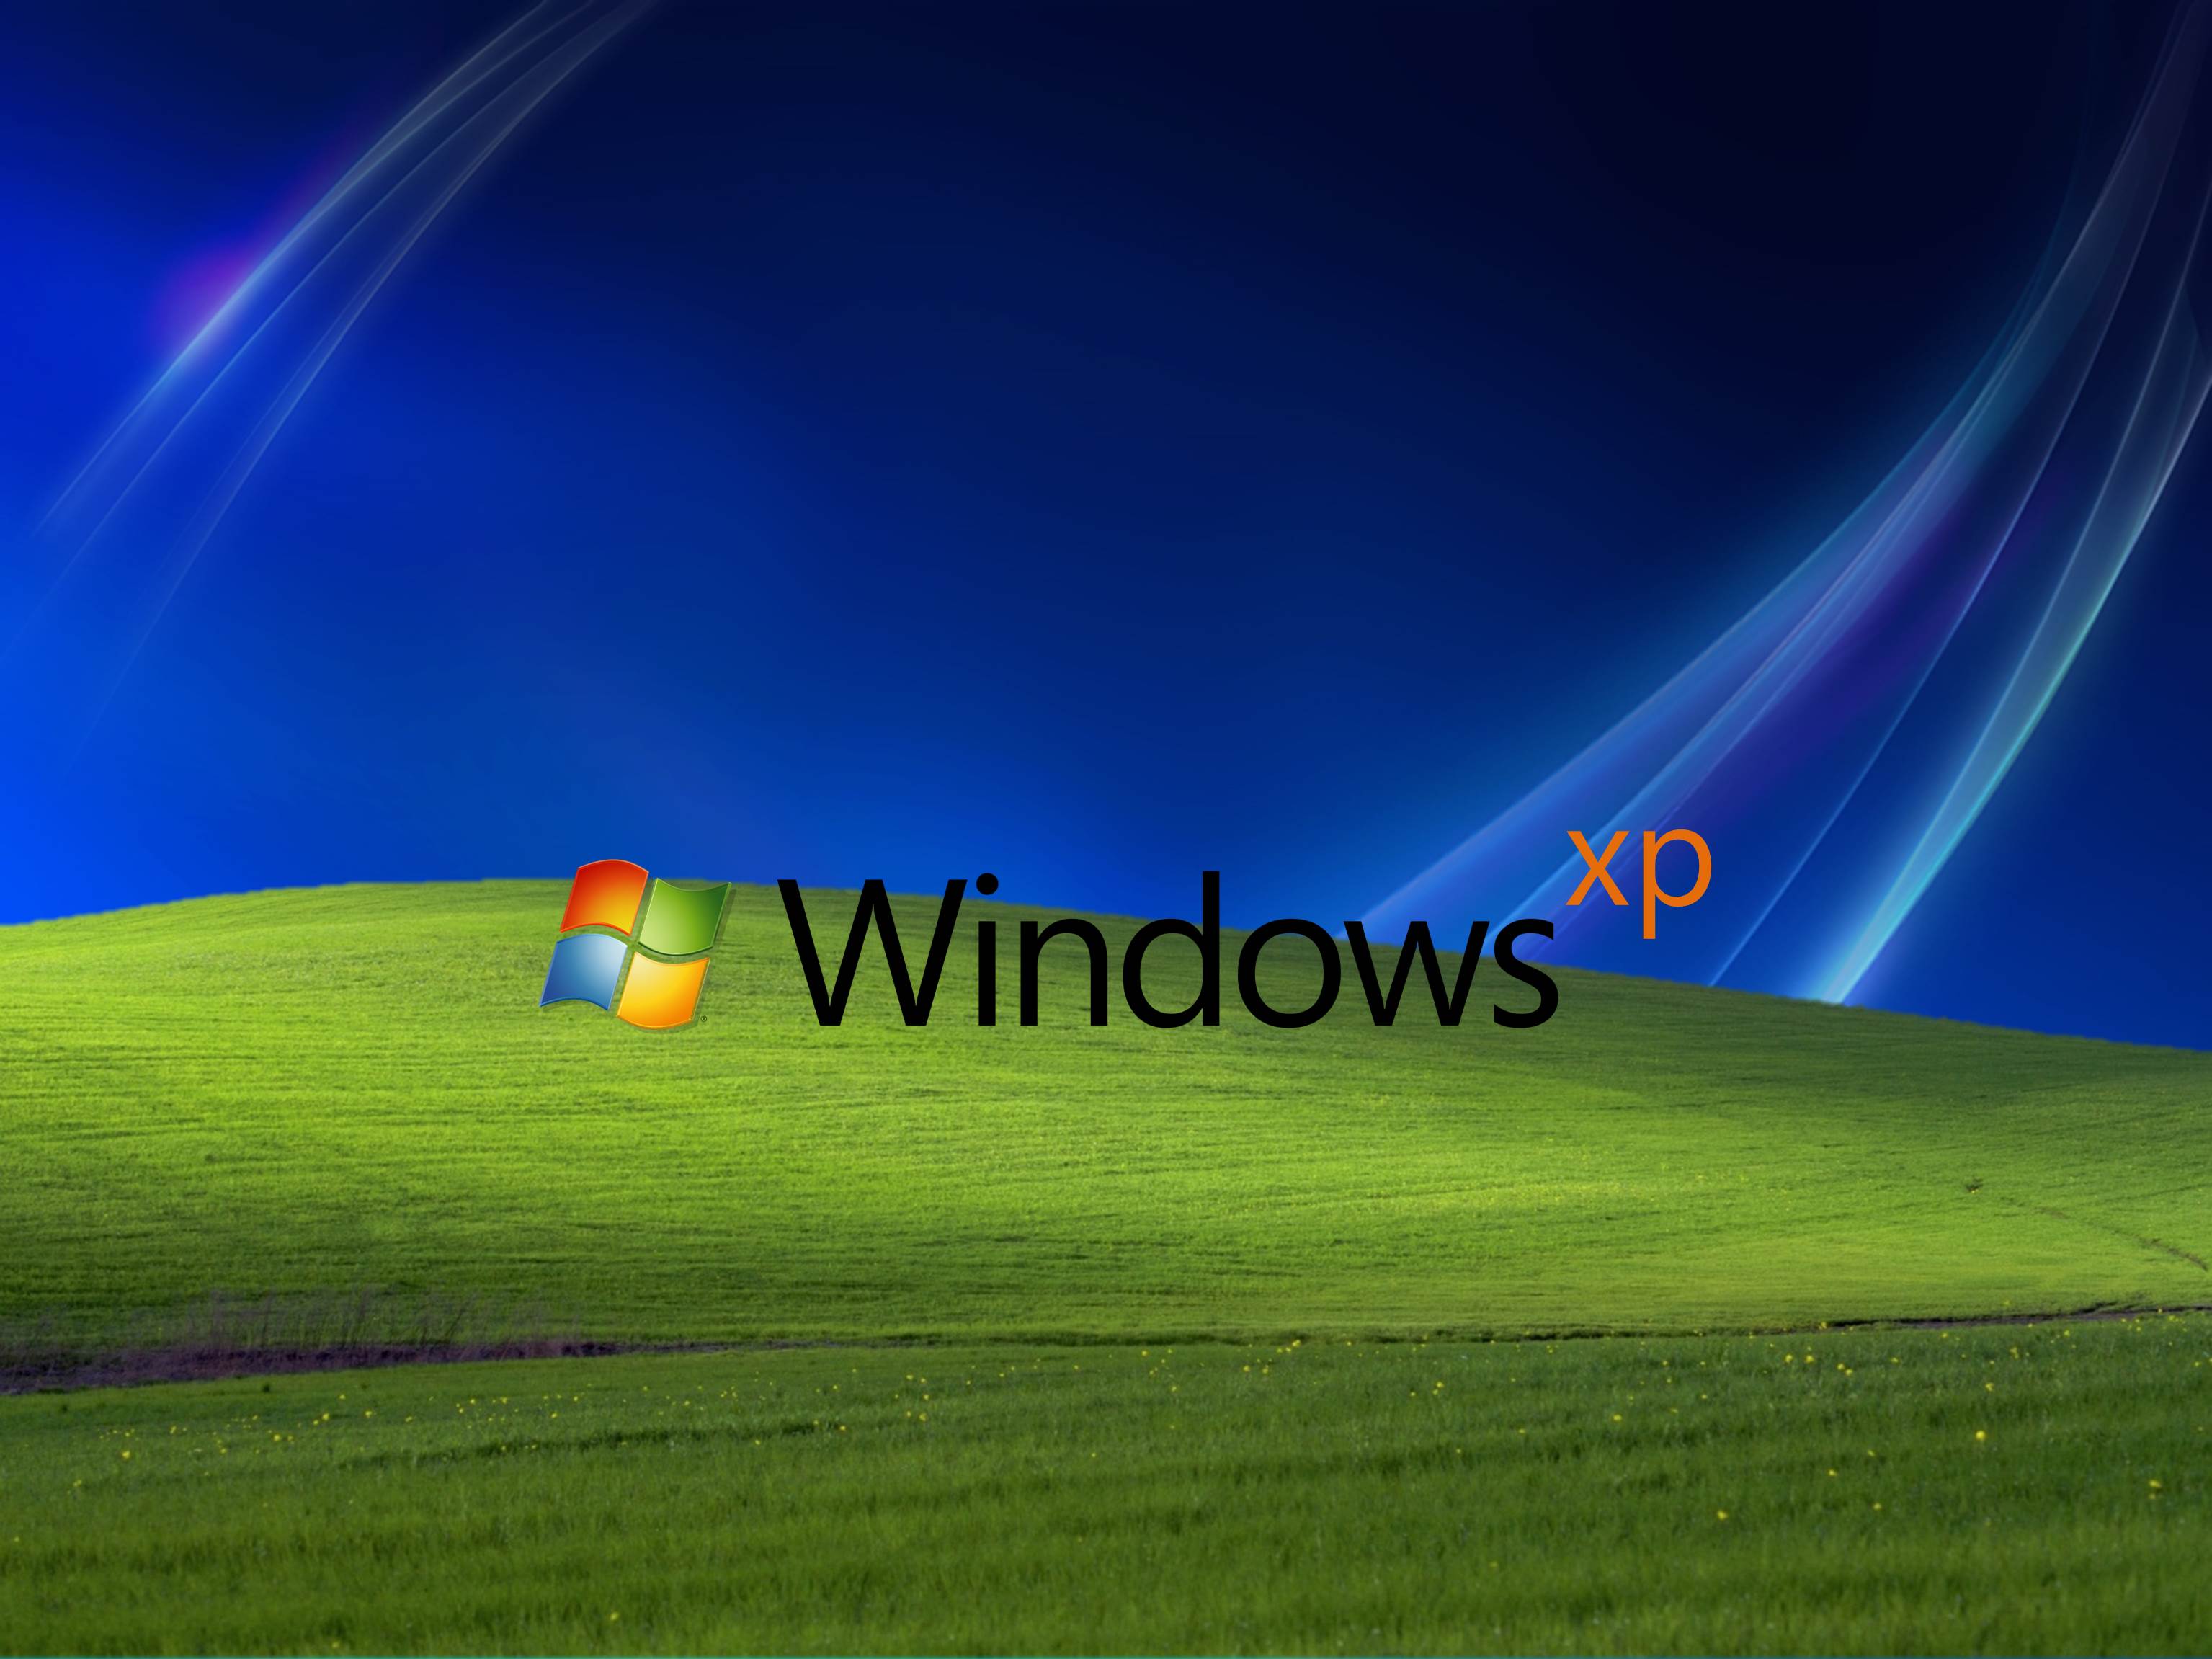 Wallpapers For Windows Xp - Wallpaper Cave